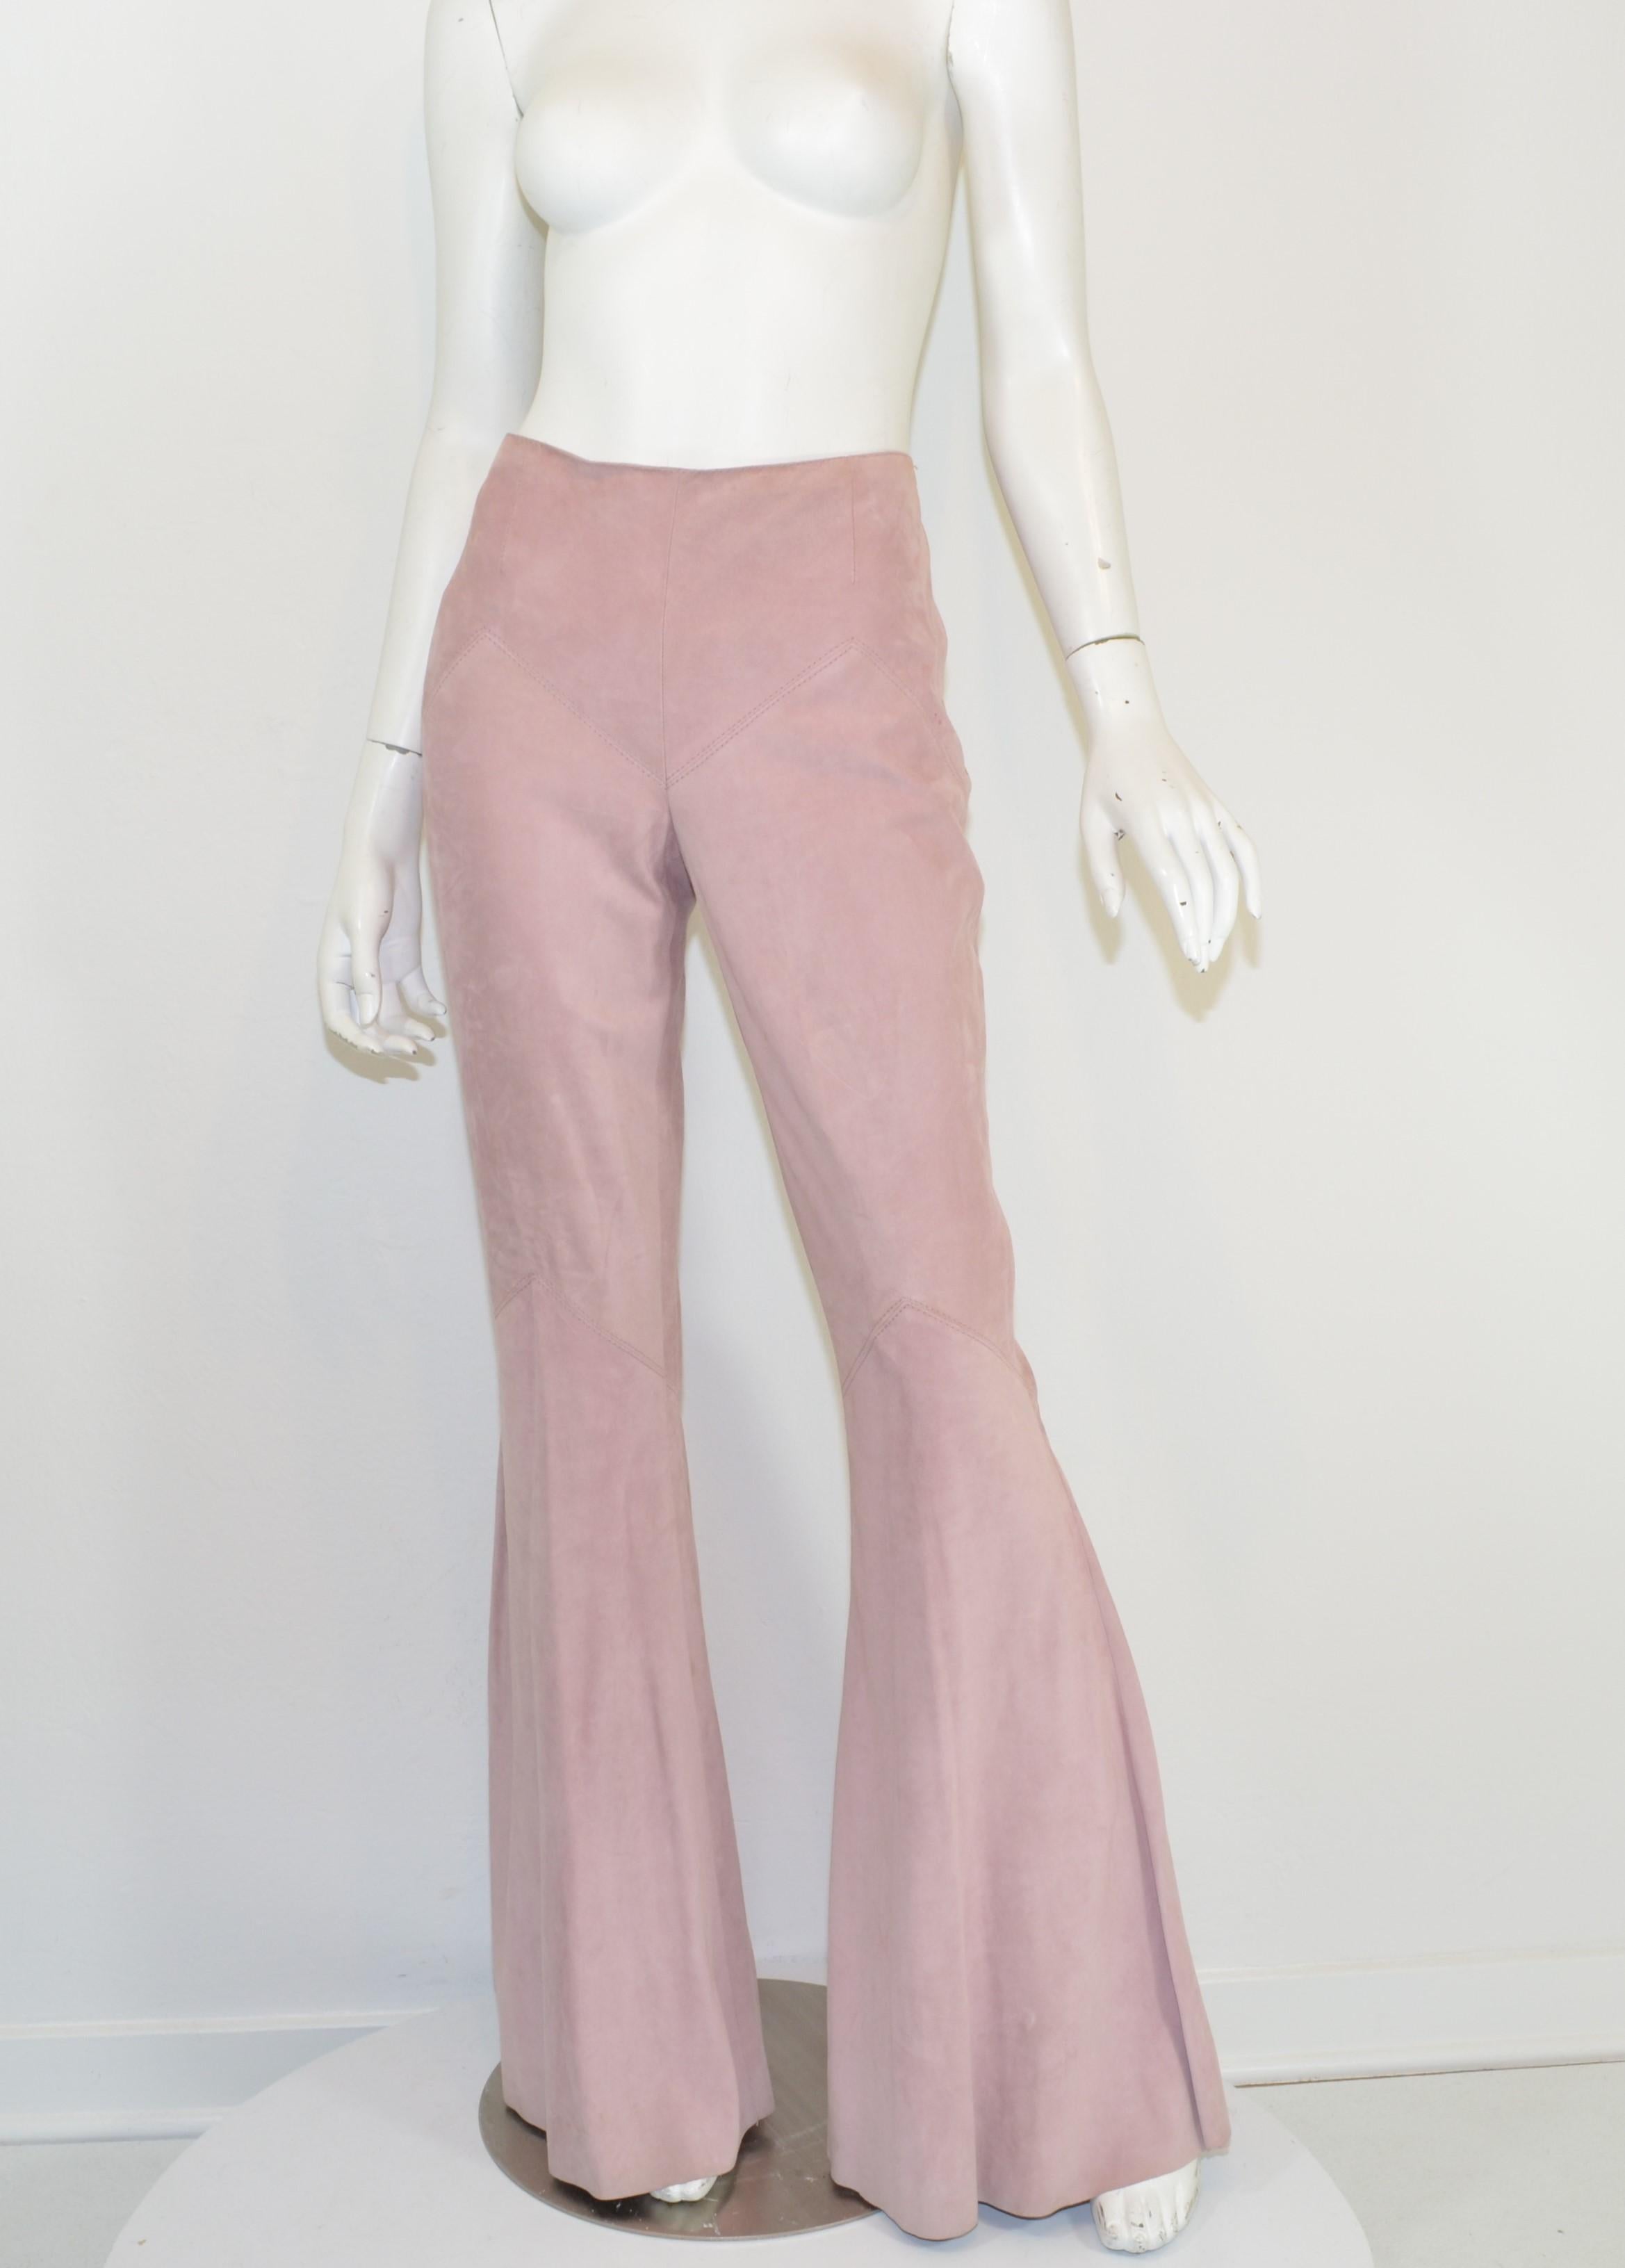 Valentino Pink Suede Flare Pants -- Featured in a blush pink suede with a side zipper and hook-and-eye fastening and a flared legs. Pants are in good condition showing some normal wears throughout and a few spots as pictured.

Measurements:
Waist